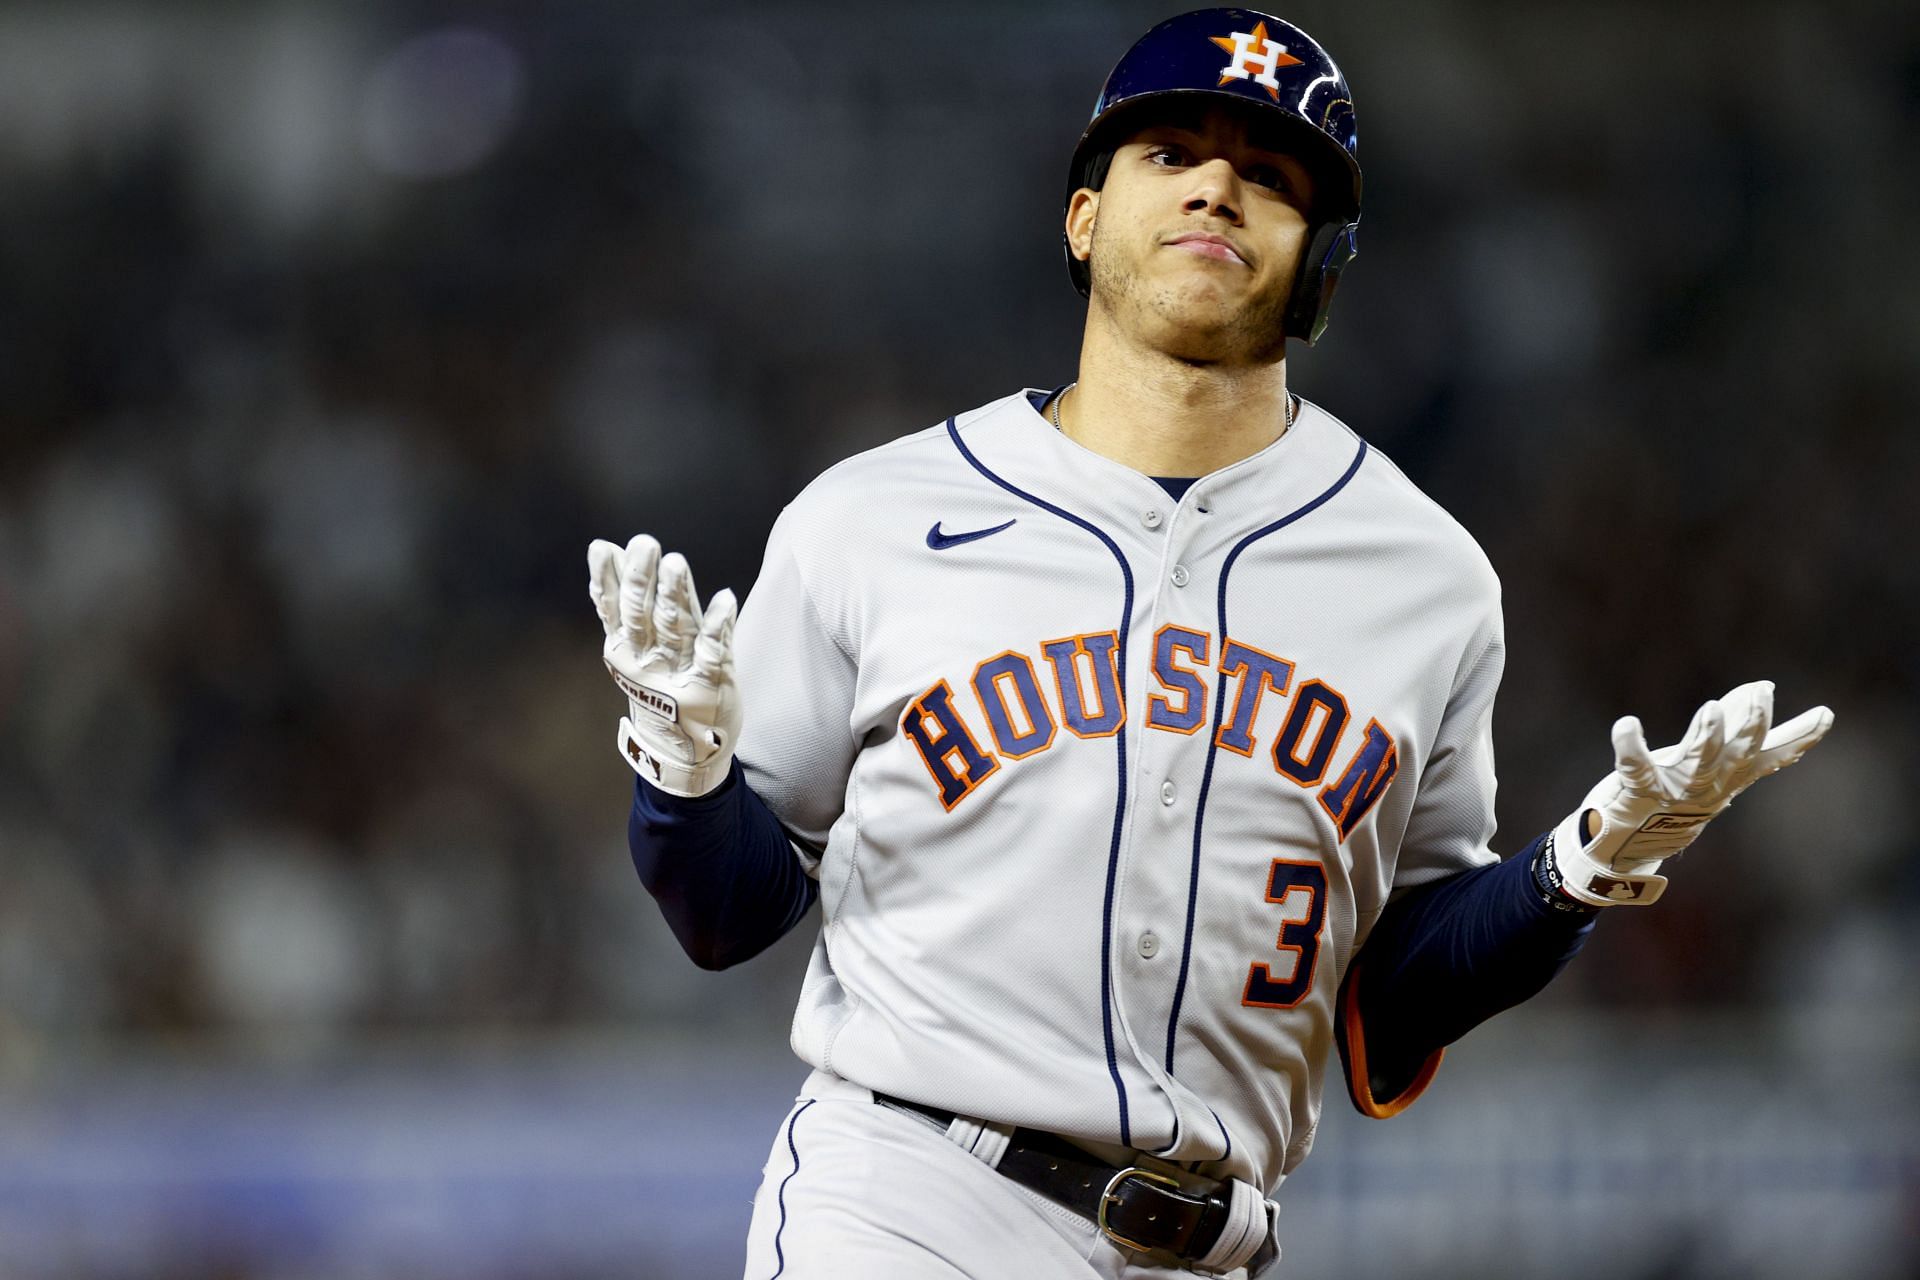 NEW YORK, NEW YORK - OCTOBER 23: Jeremy Pena #3 of the Houston Astros celebrates his three-run home run in the third inning against the New York Yankees in game four of the American League Championship Series at Yankee Stadium on October 23, 2022, in the Bronx borough of New York City. (Photo by Sarah Stier/Getty Images)